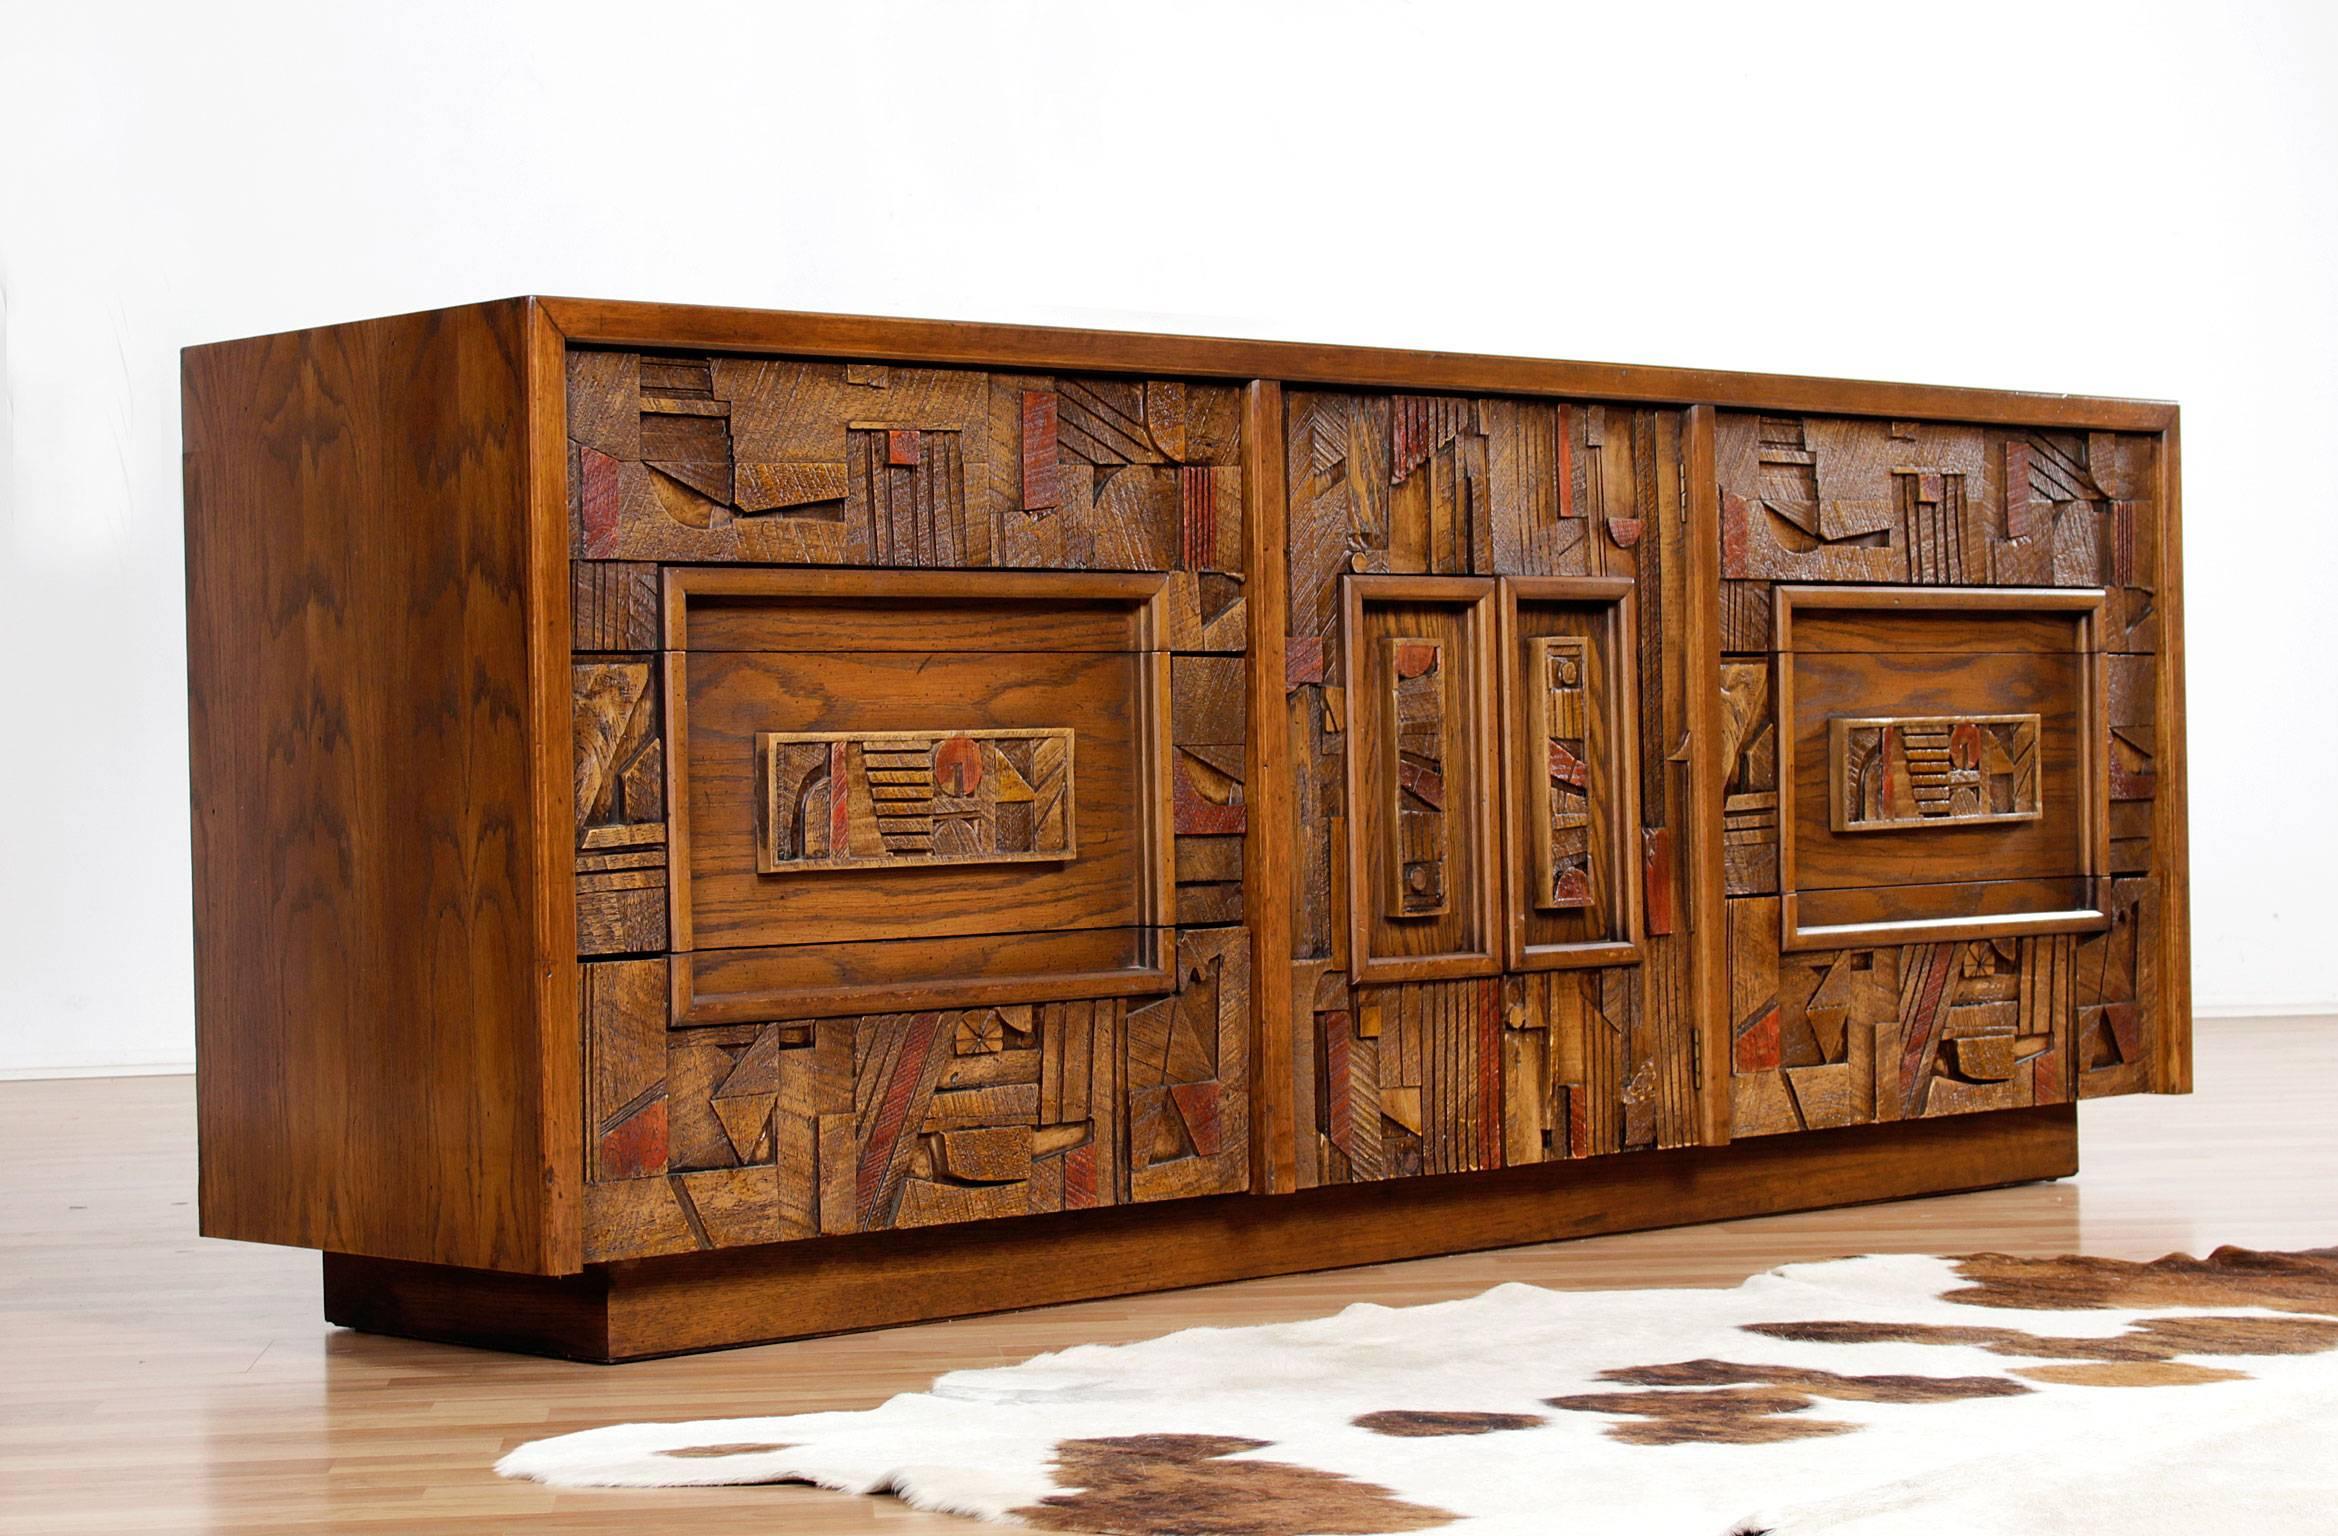 A vintage, 1970s, Lane Brutalist triple dresser with an intricately laid, highly textured pattern that adorns the front facade. The rough hewn forms exemplify the Brutalist aesthetic. Center door conceals a column of three drawers. Ample storage